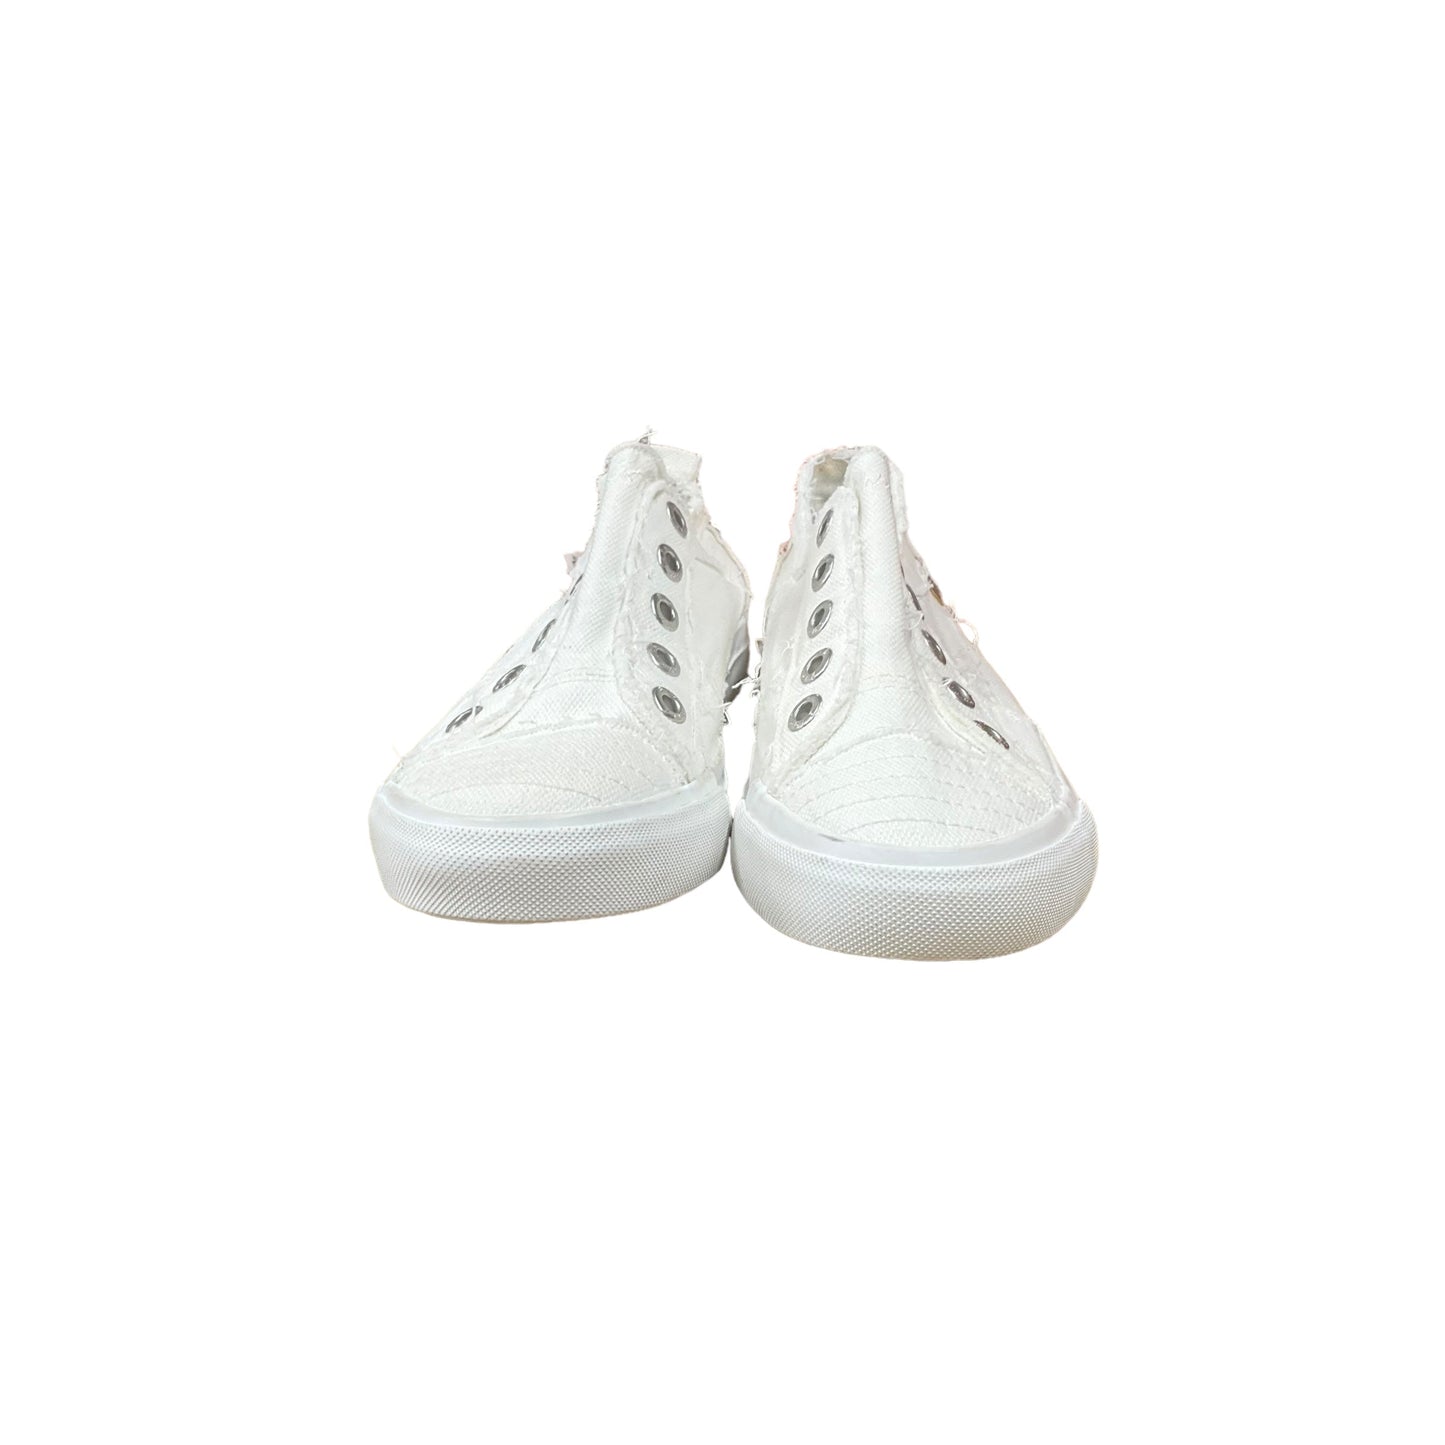 White Shoes Sneakers Blowfish, Size 8.5